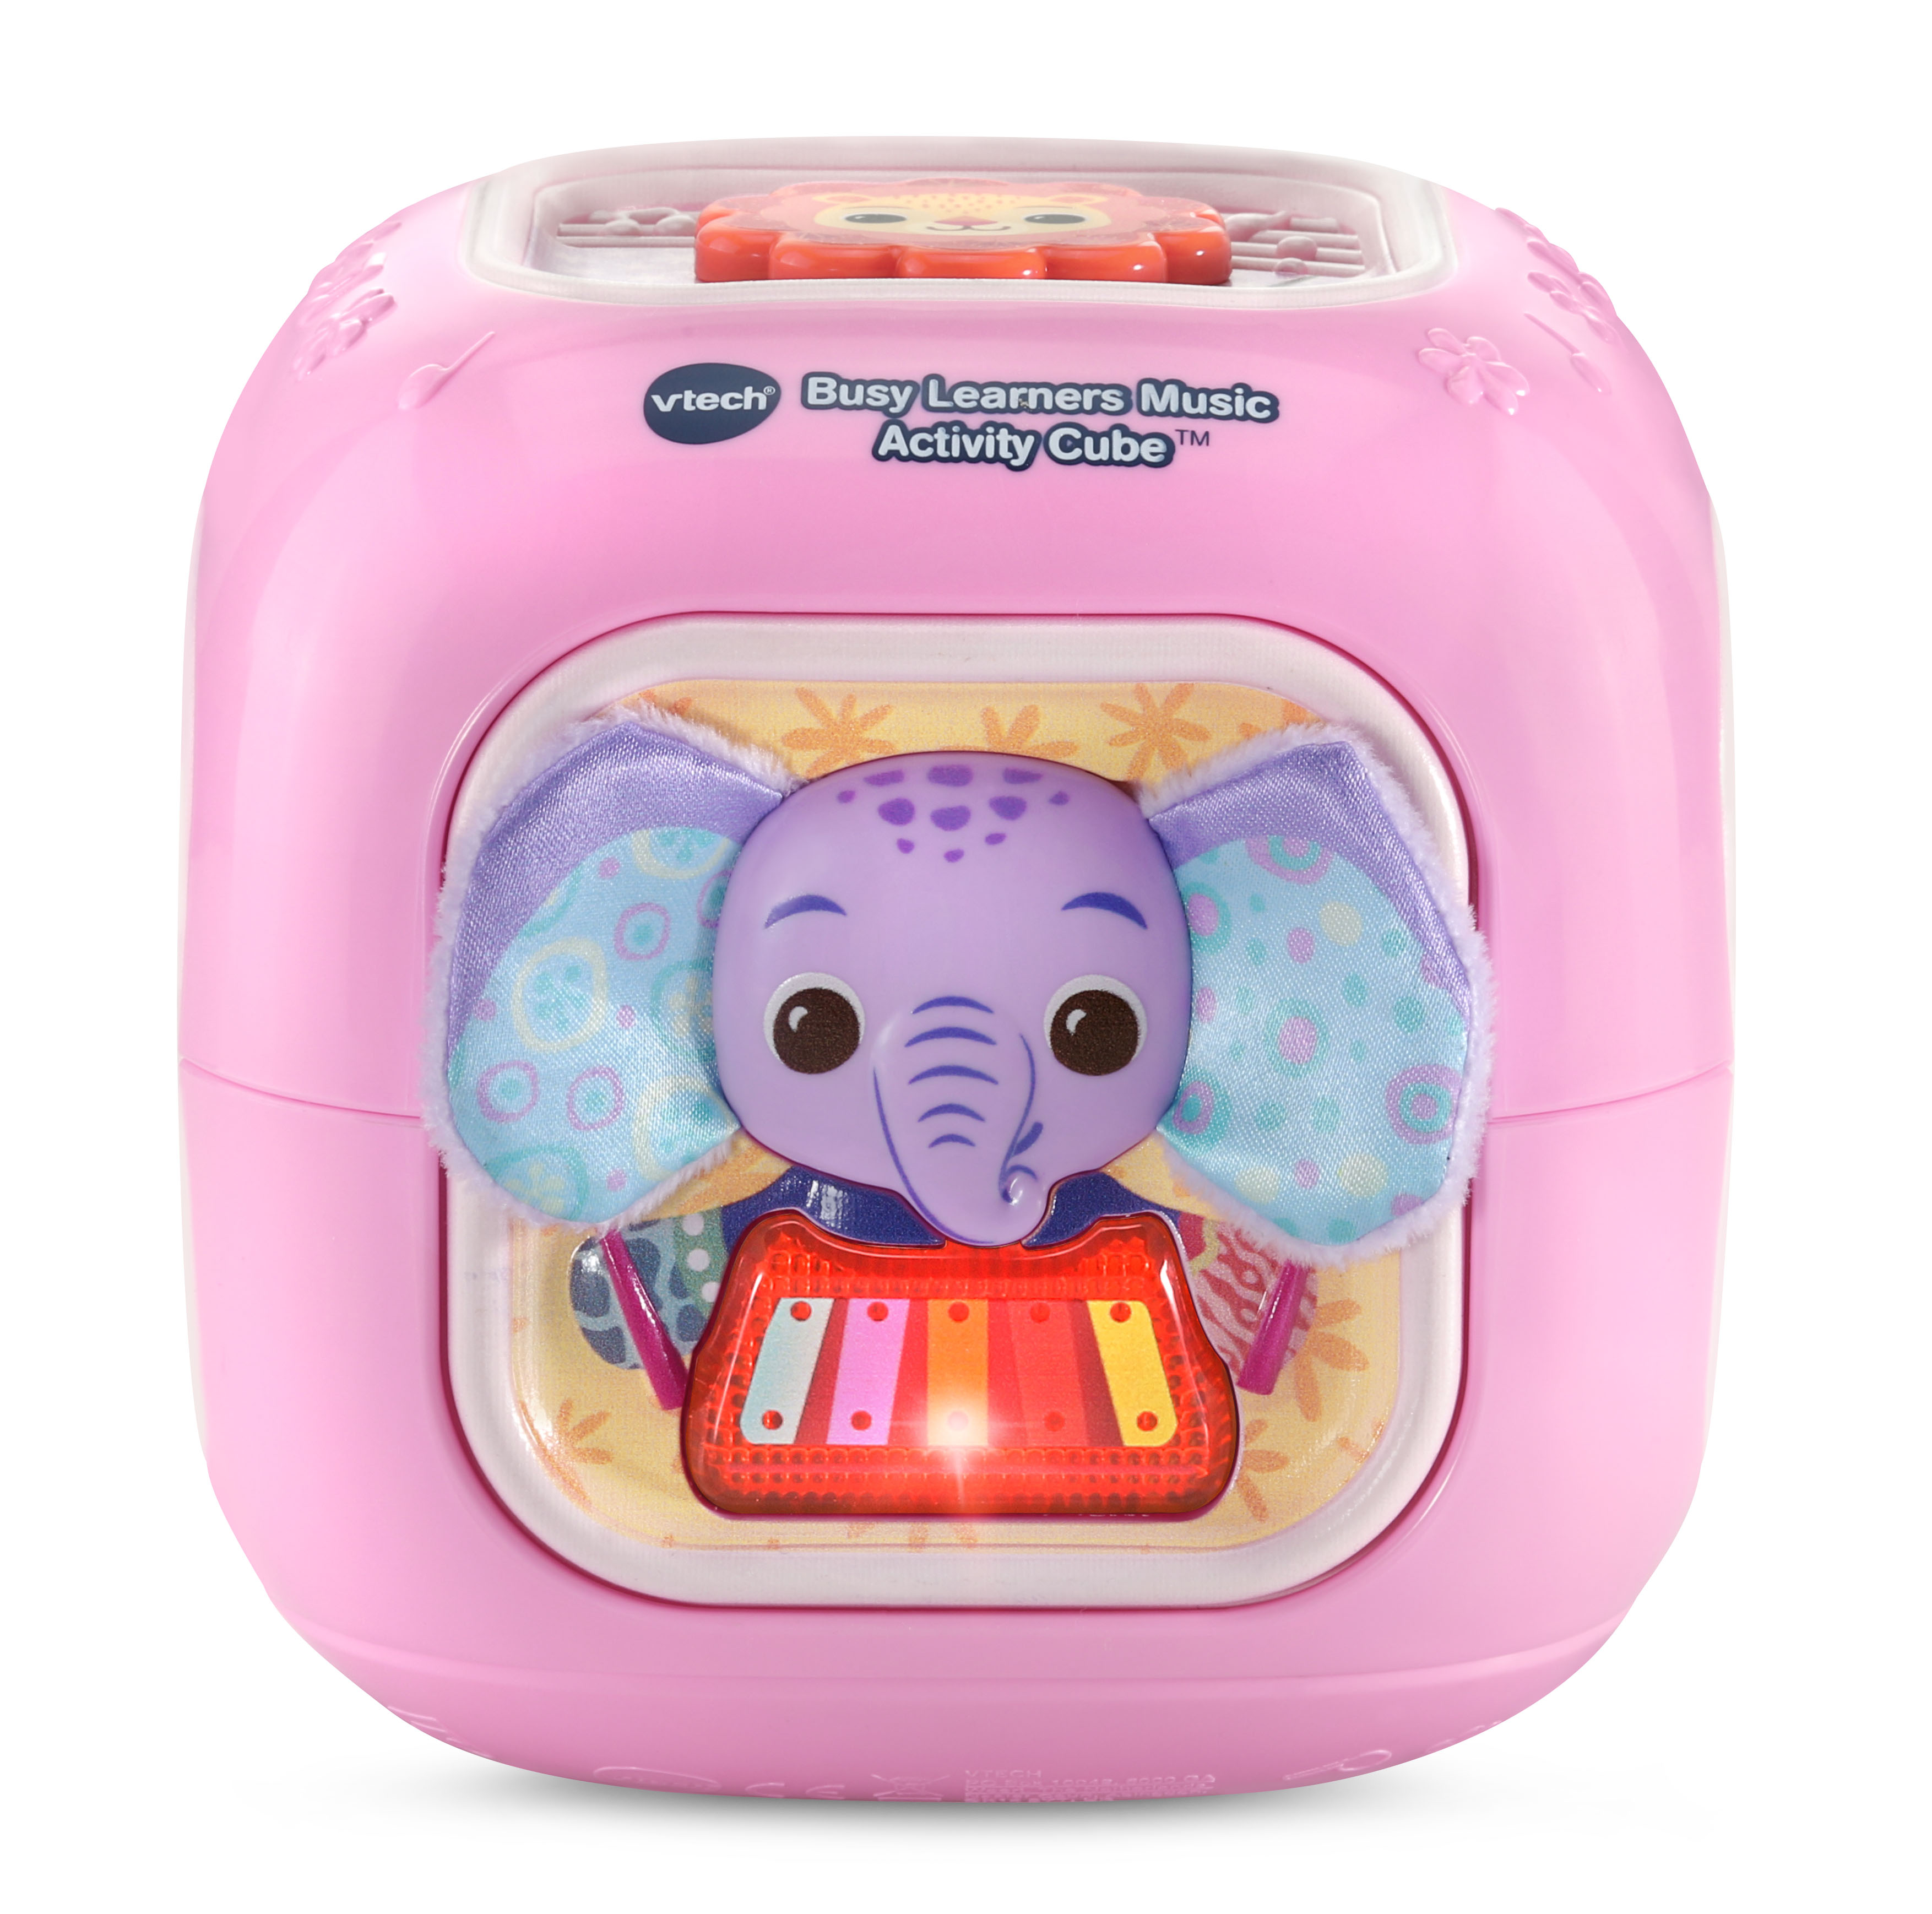 VTech Baby® Busy Learners Music Activity Cube™ - Pink